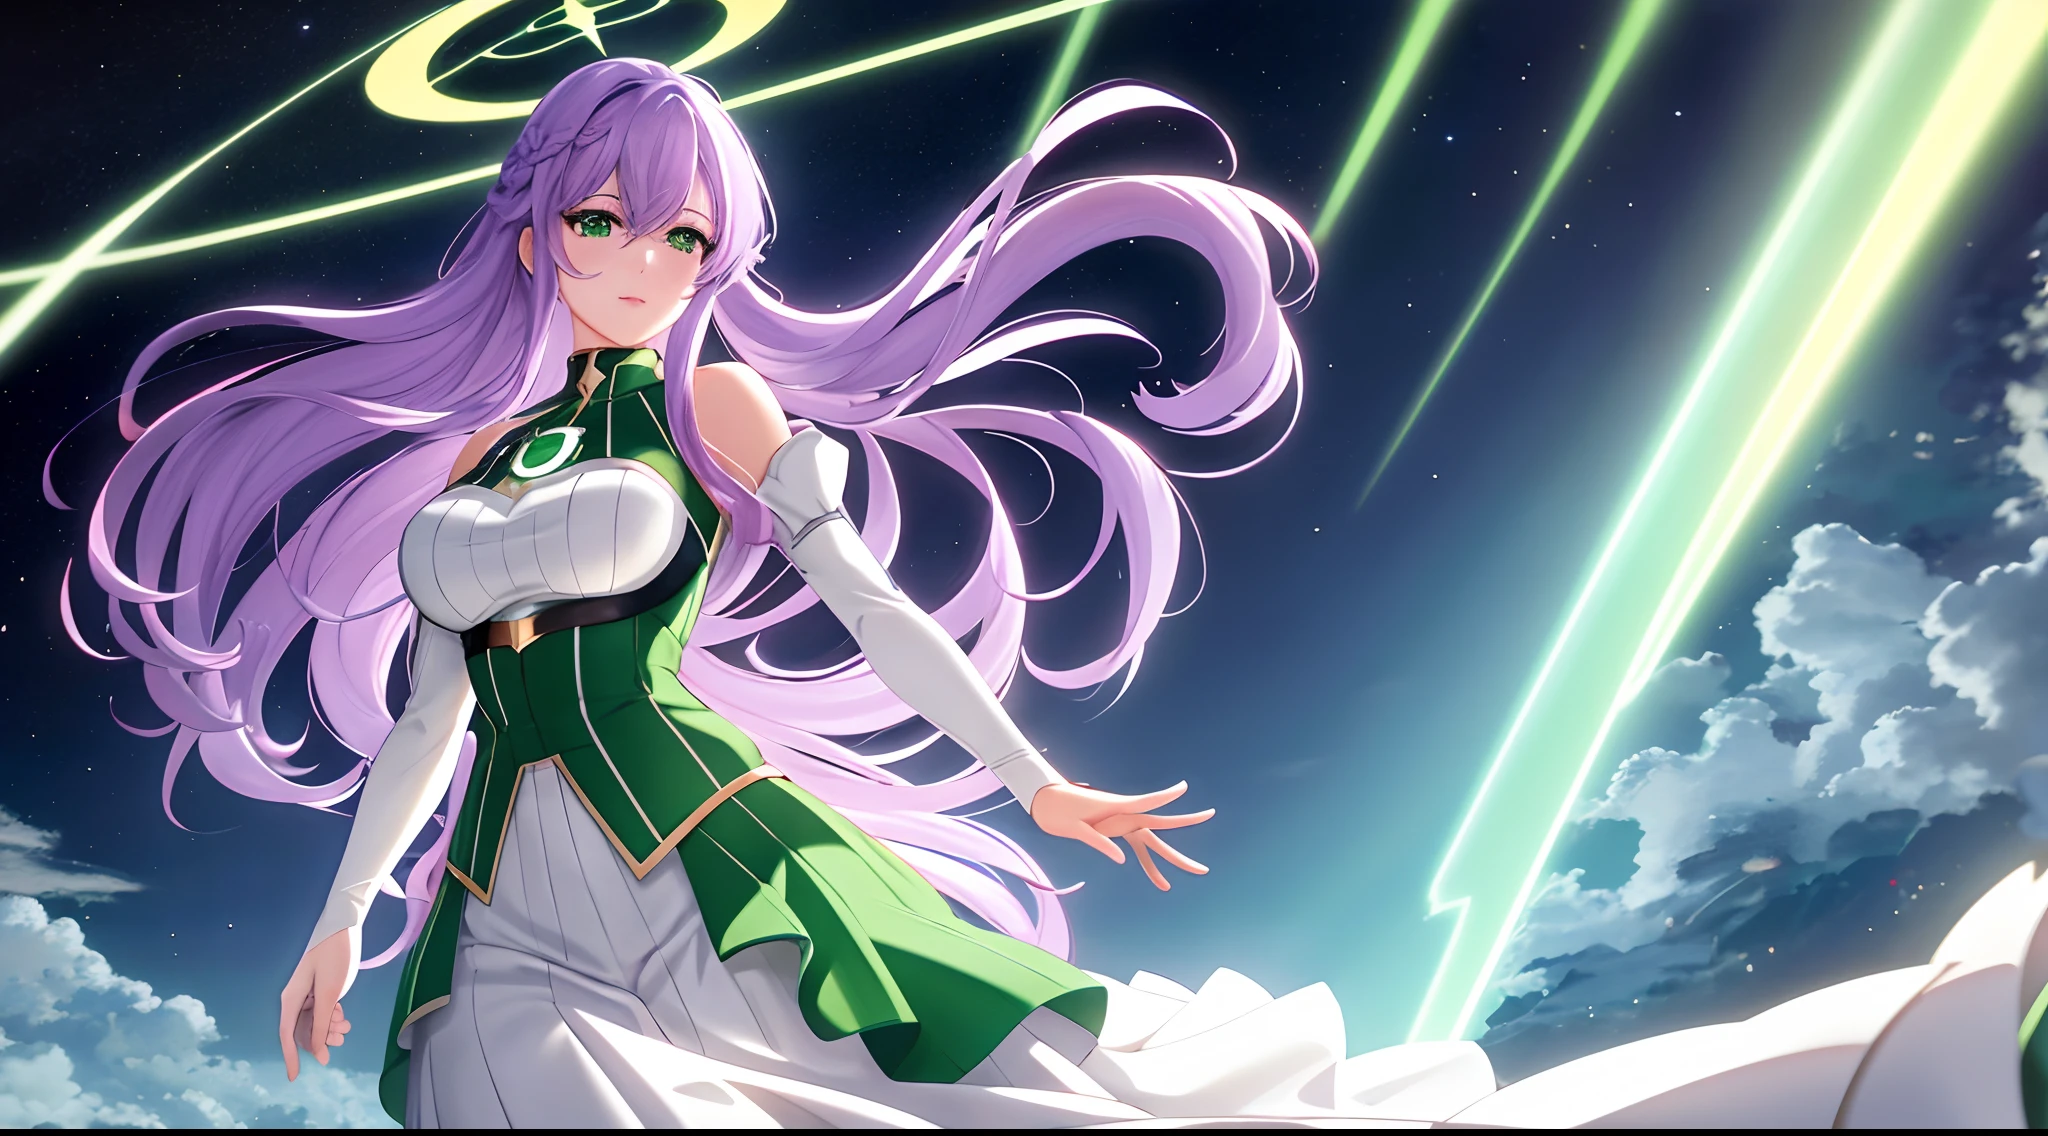 Athena with plain long light purple hair,hair between eyes,green eyes,rosy cheeks,full lips,thin eyebrows,slender body,wearing dc green lantern costume and full long skirt,cute anime girl,full body,large castle in background,anime style,extremely deep depth of field,Lumen Reflections,Screen Space Reflections,Diffraction Grading,Chromatic Aberration,GB Displacement,Scan Lines,Ray Traced,Anti-Aliasing,FXAA,TXAA,RTX,SSAO,Shaders,OpenGL-Shaders, GLSL-Shaders,Post Processing,Post-Production,cell Shading,Tone Mapping,CGI,VFX,SFX,insanely detailed and intricate, 4K,standing, solo, masterpiece, best quality, detailed face, detailed eyes, highres, standing, solo,masterpiece, best quality